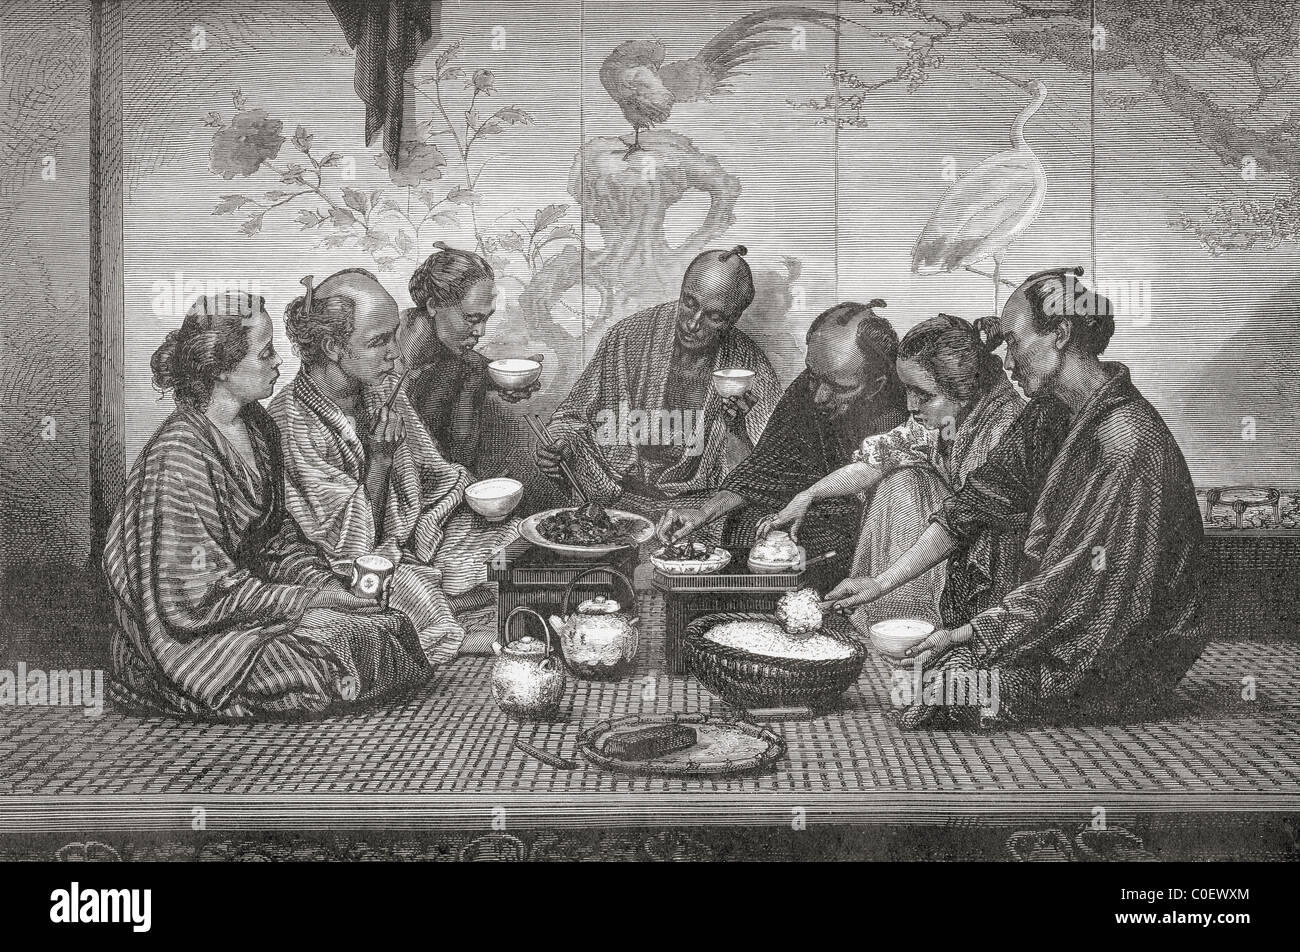 A Japanese middle-class family's mealtime in the 19th century. Stock Photo